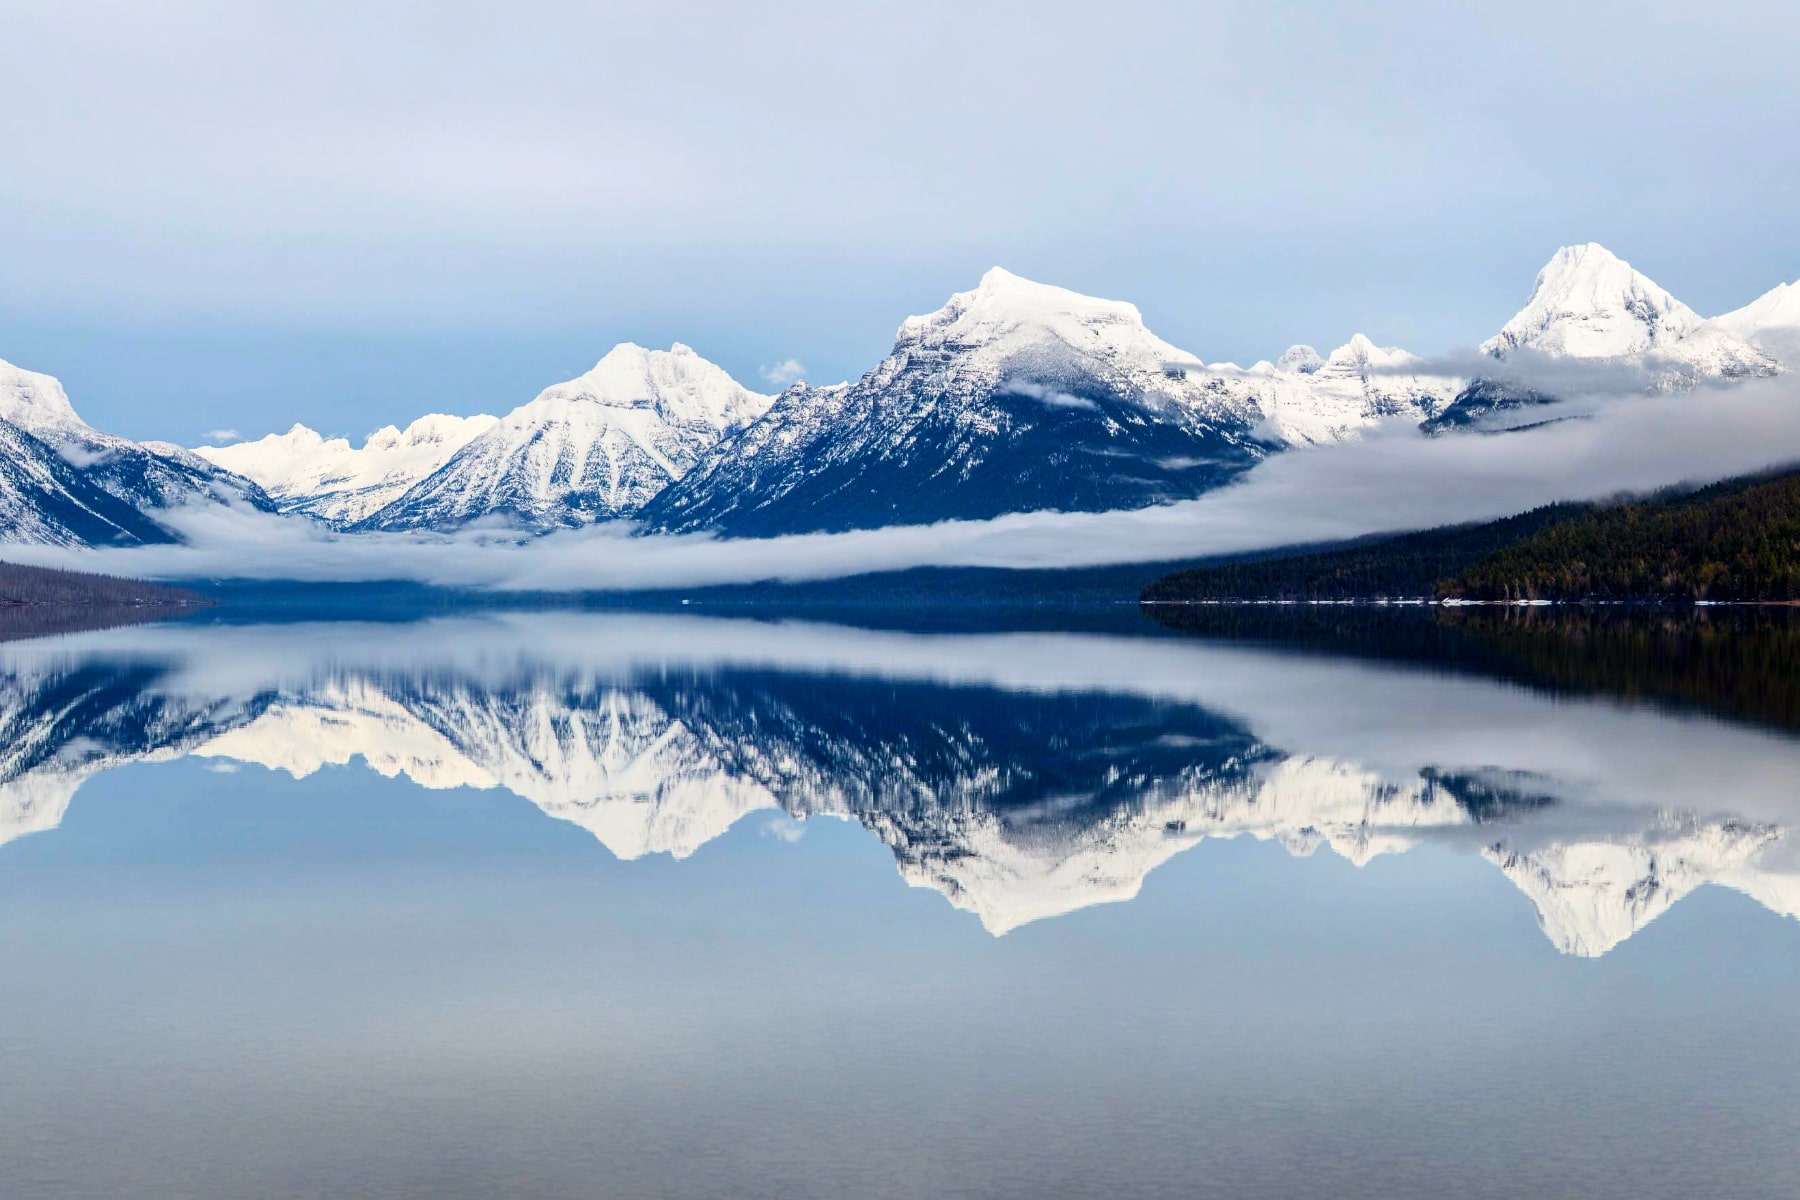 Mountains reflect on Lake McDonald, making this one of the best national parks to visit in March for those seeking winter solitude